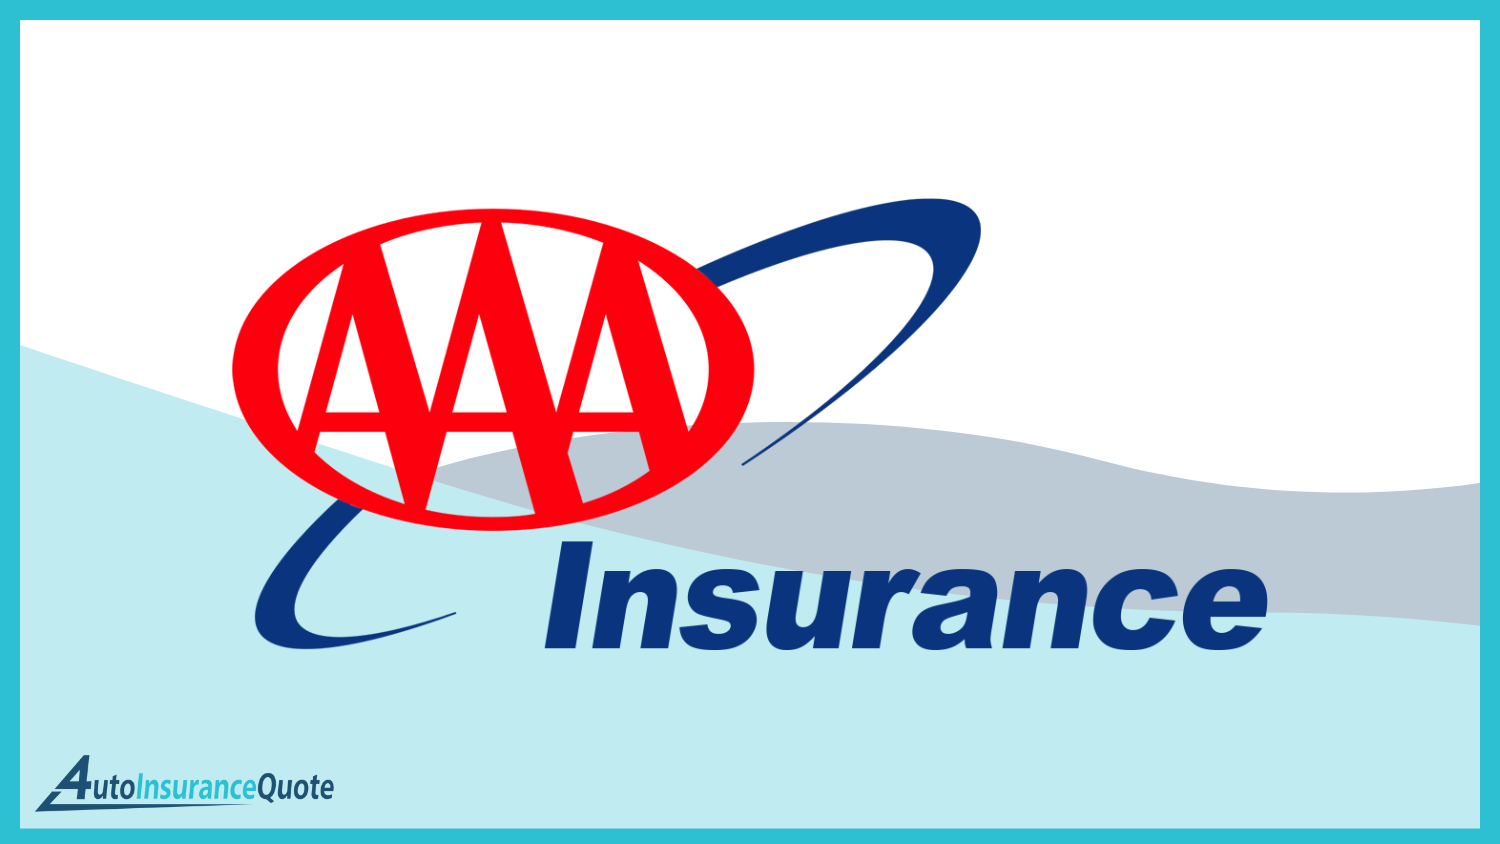 AAA: Best Auto Insurance for College Graduates